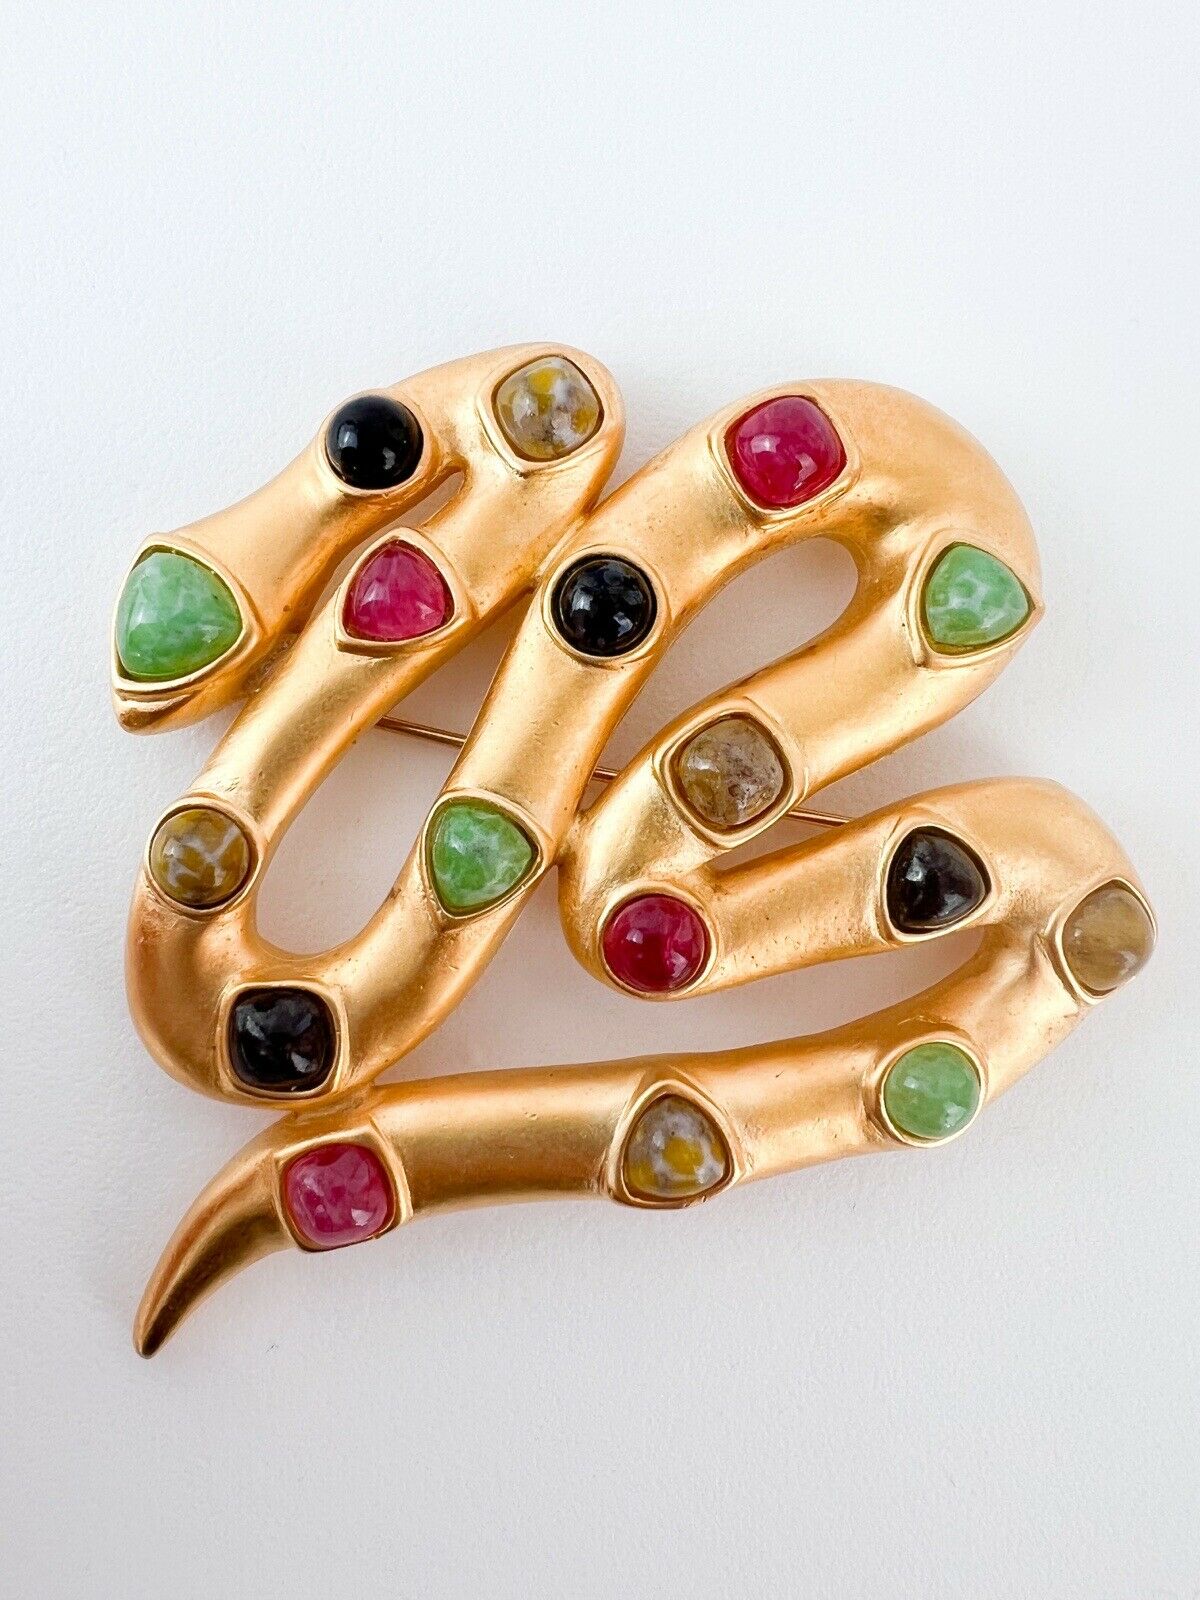 【SOLD OUT】Karl Lagerfeld Vintage Gold Tone Brooch Pin Cabochon Multi-Color